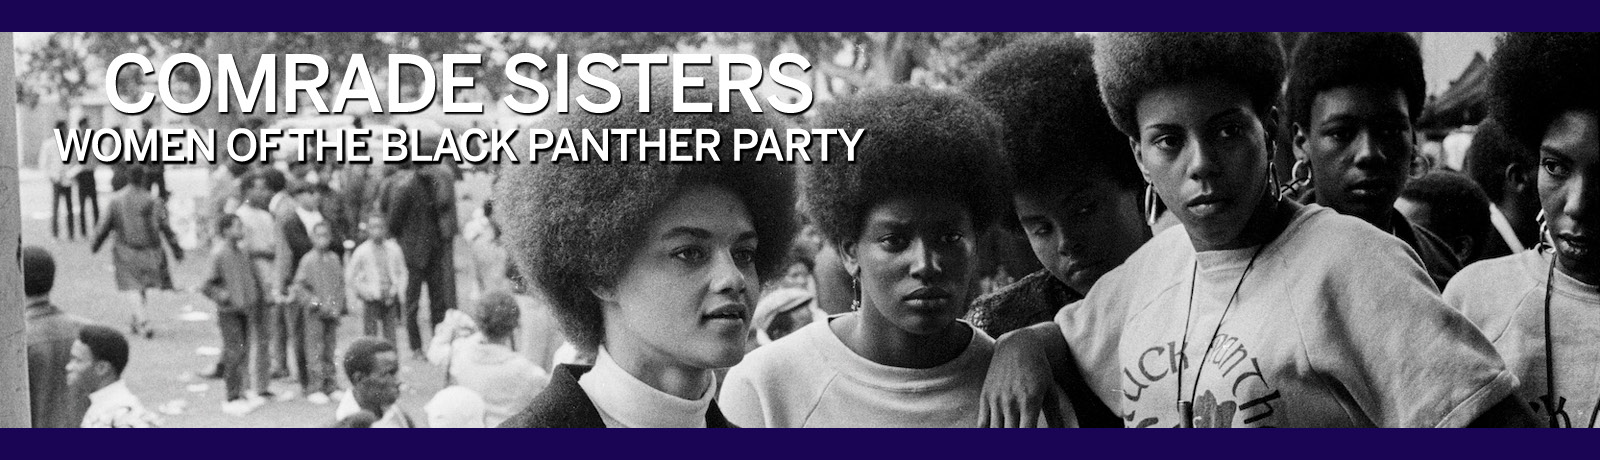 Exhibit pays tribute to the women of the Black Panther Party